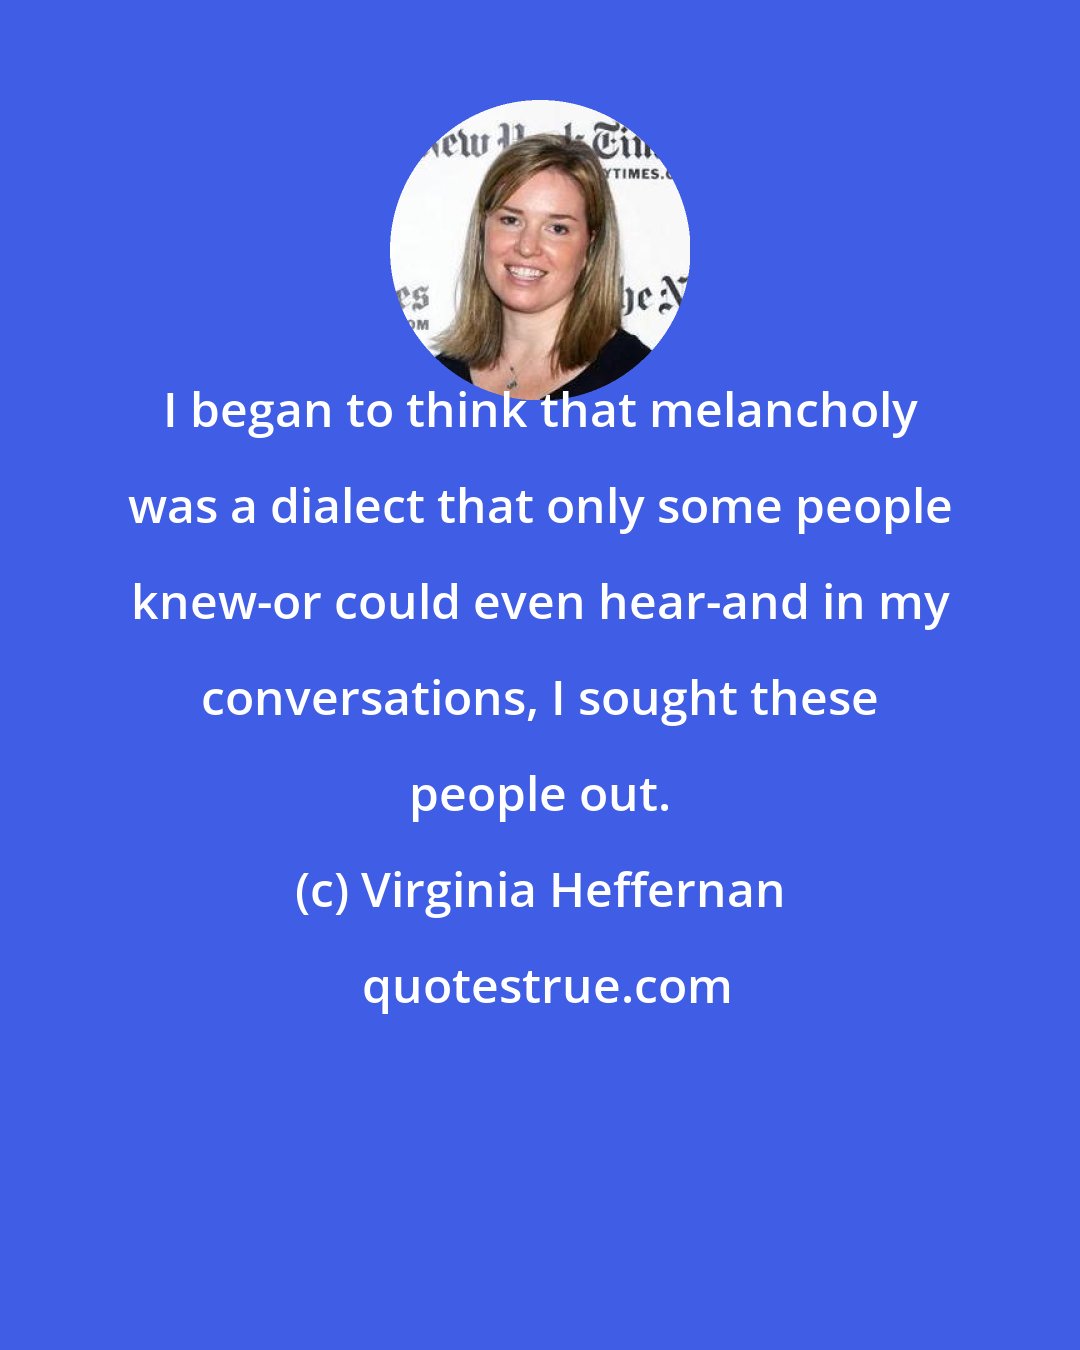 Virginia Heffernan: I began to think that melancholy was a dialect that only some people knew-or could even hear-and in my conversations, I sought these people out.